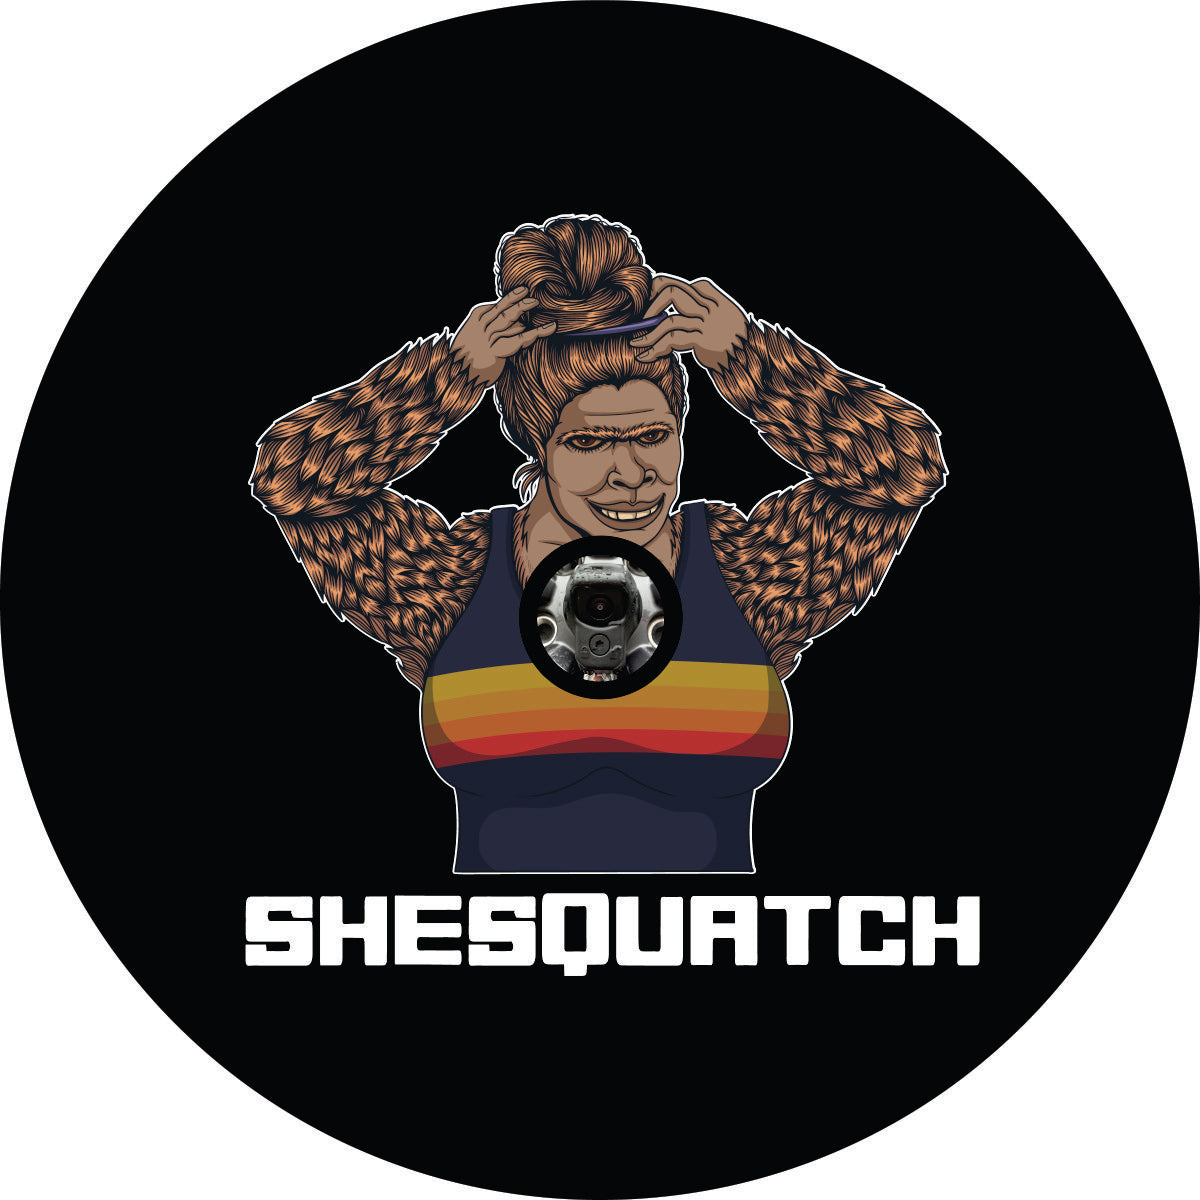 Shesquatch putting her hair in a top knot messy bun black vinyl custom spare tire cover with a JL back up camera design 